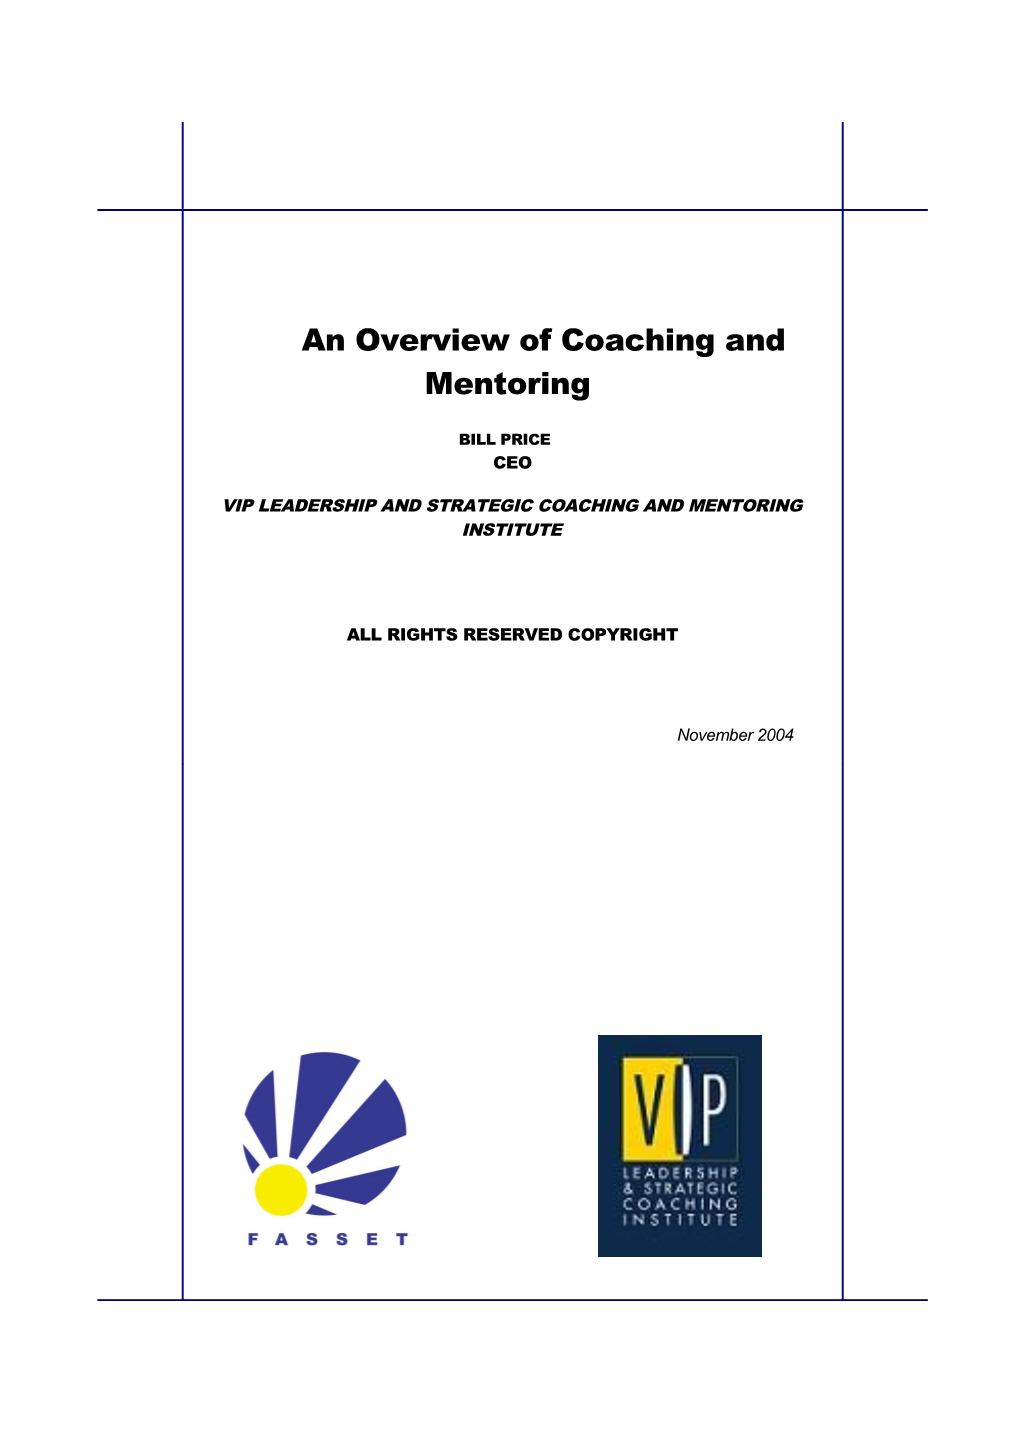 The Common Thing About Coaching and Mentoring Is That It Is Focused on Sustainable Peak